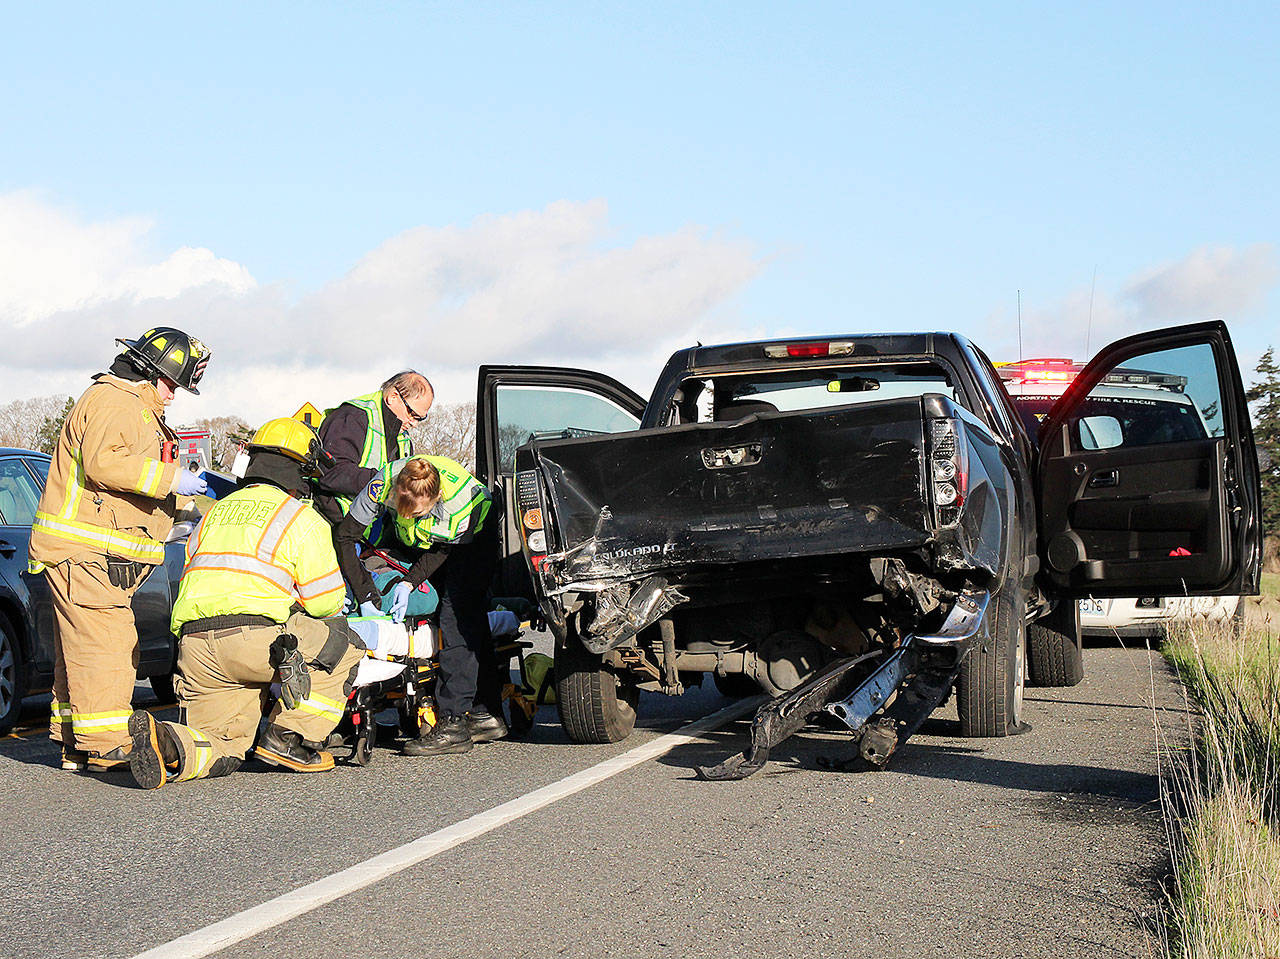 First responders help a woman who was driving a pick-up involved in an accident Monday afternoon. She and the passenger in the other vehicle were both transported to WhidbeyHealth Medical Center for unknown injuries. Photo by Laura Guido/Whidbey News-Times